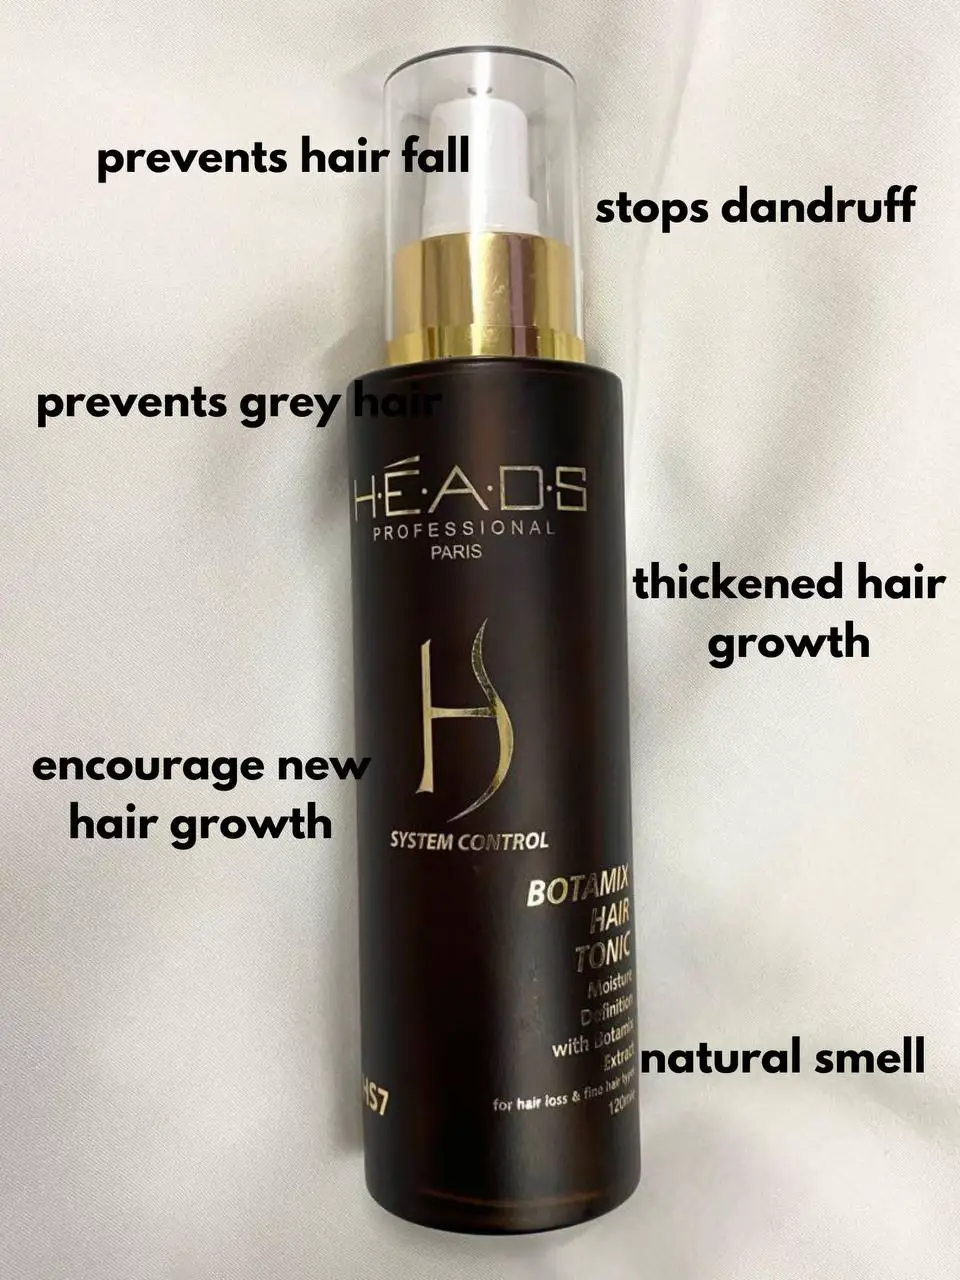 Hair tonic recommendations for hair growth ✨ | Gallery posted by Myra D' 🦋  | Lemon8